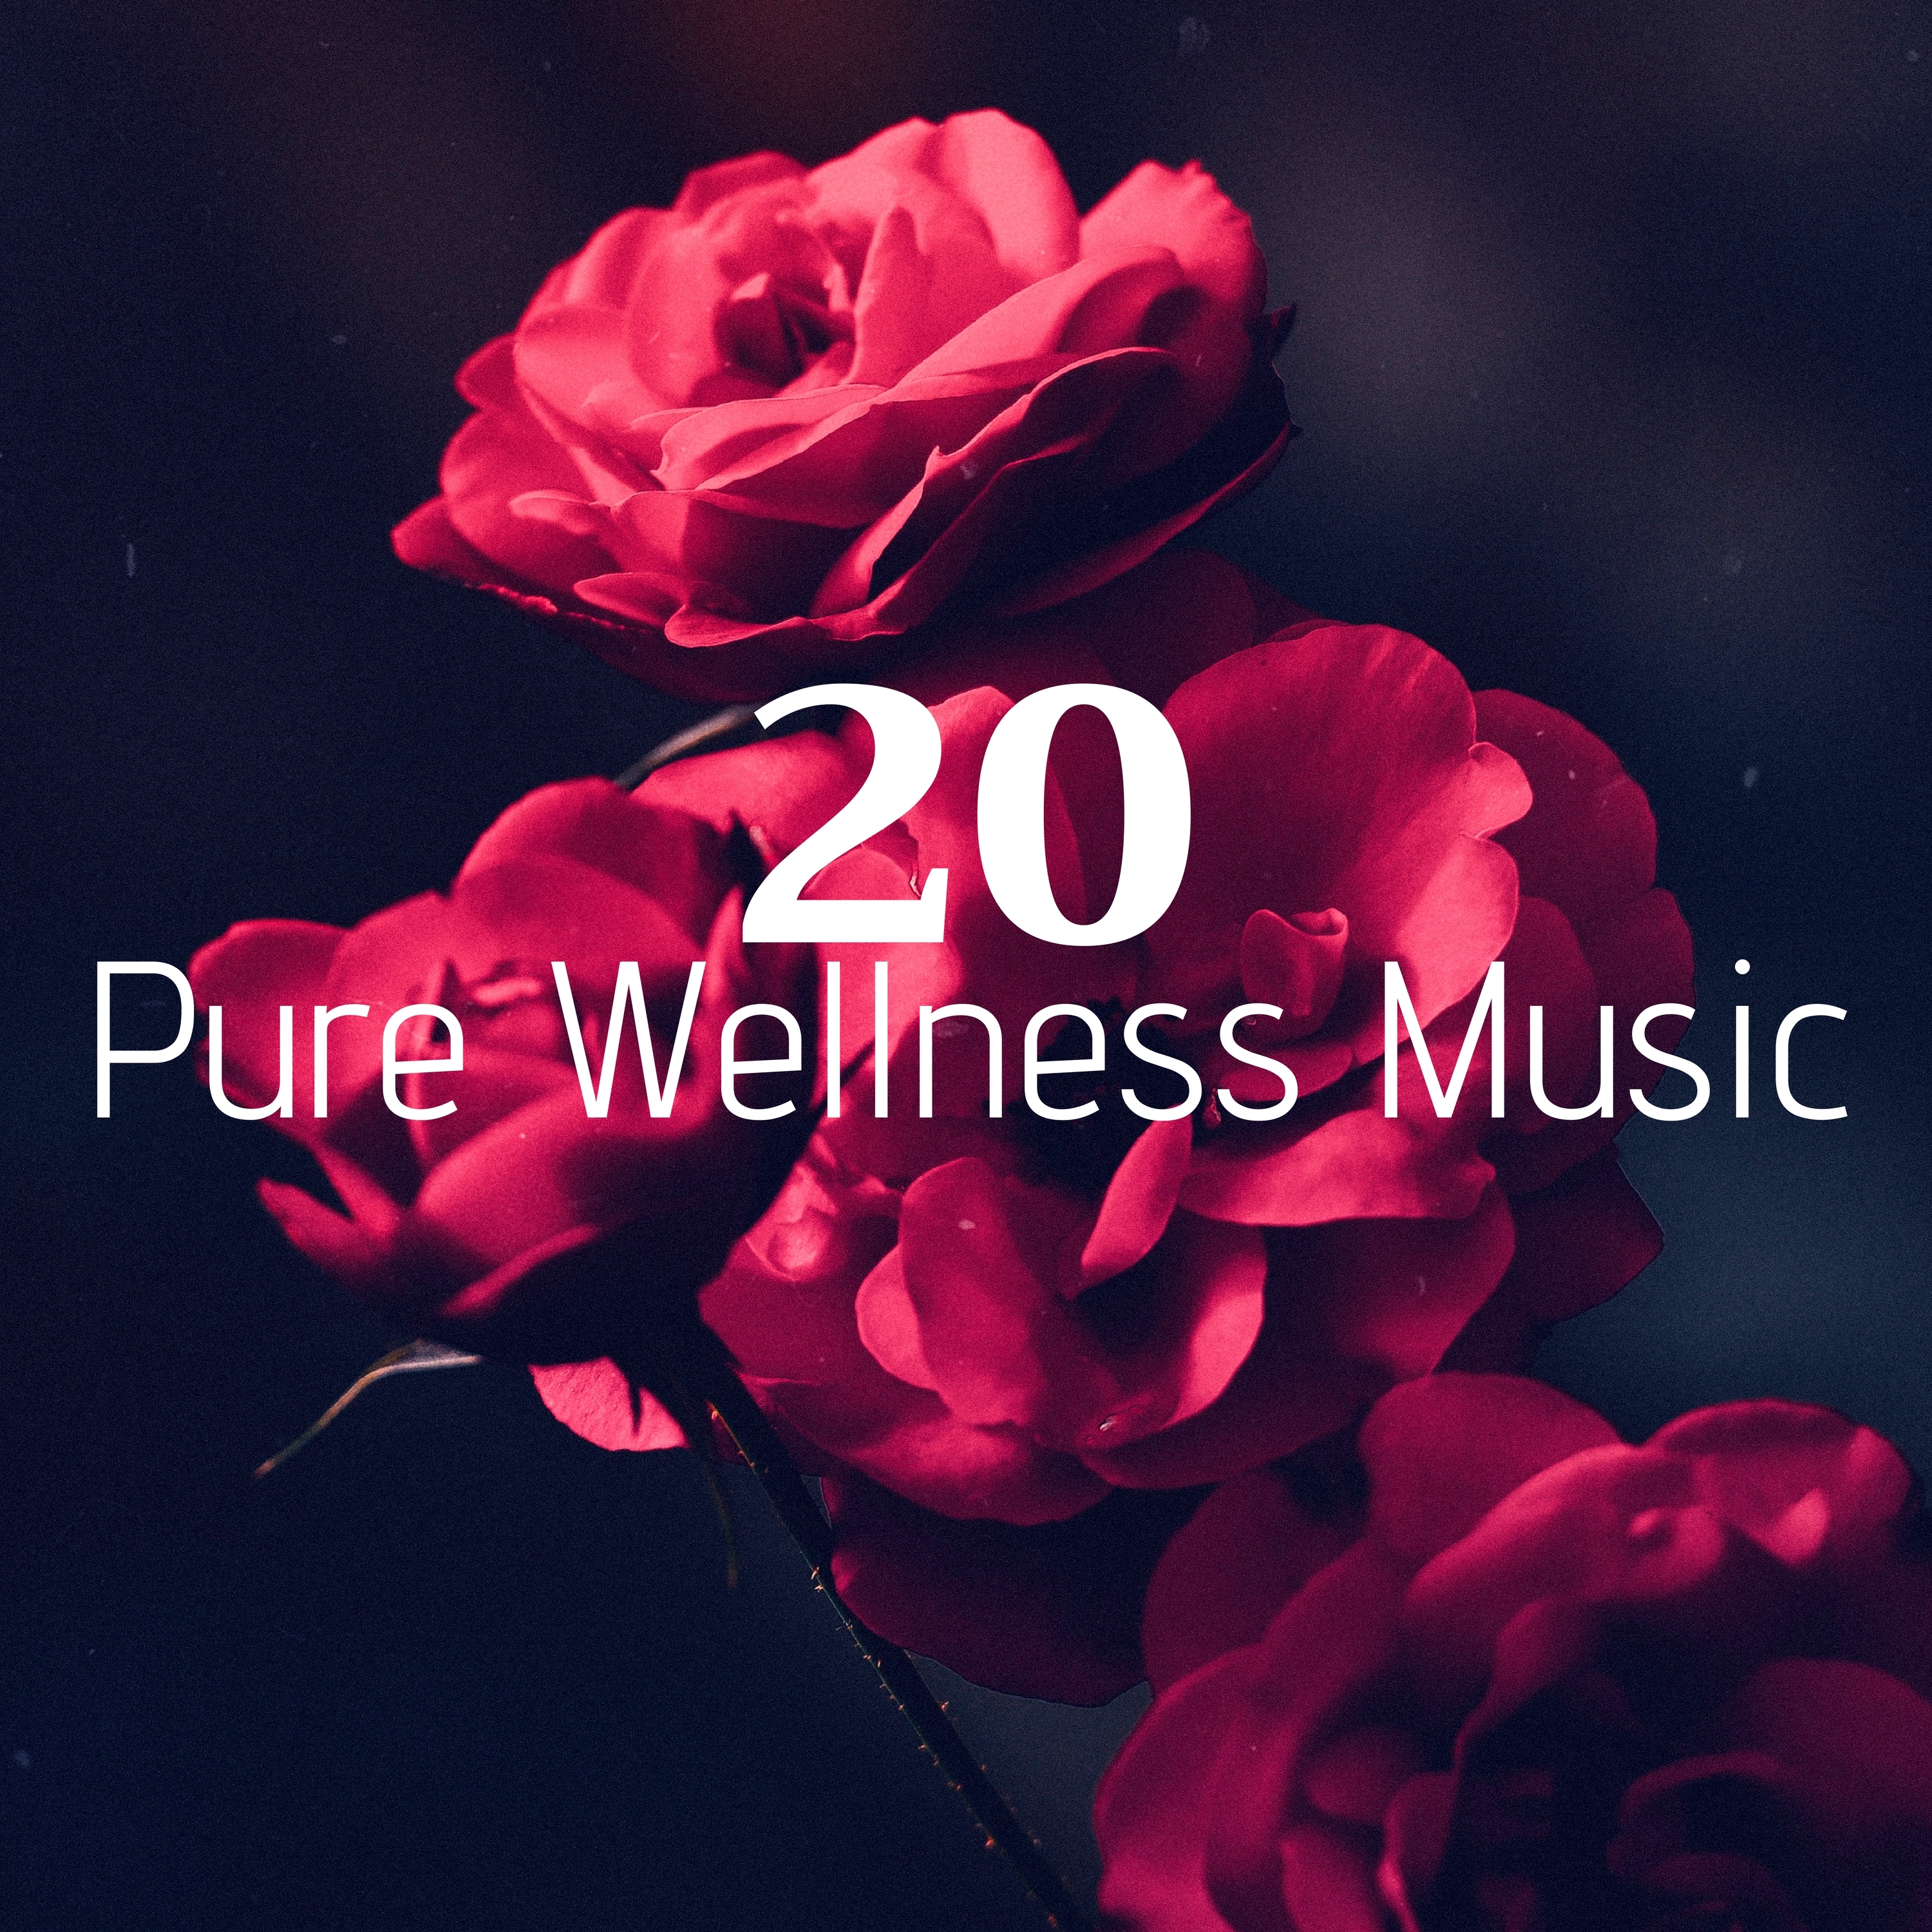 20 Pure Wellness Music - Rain Sounds, New Age Music, Find Relaxation Inside Your Soul